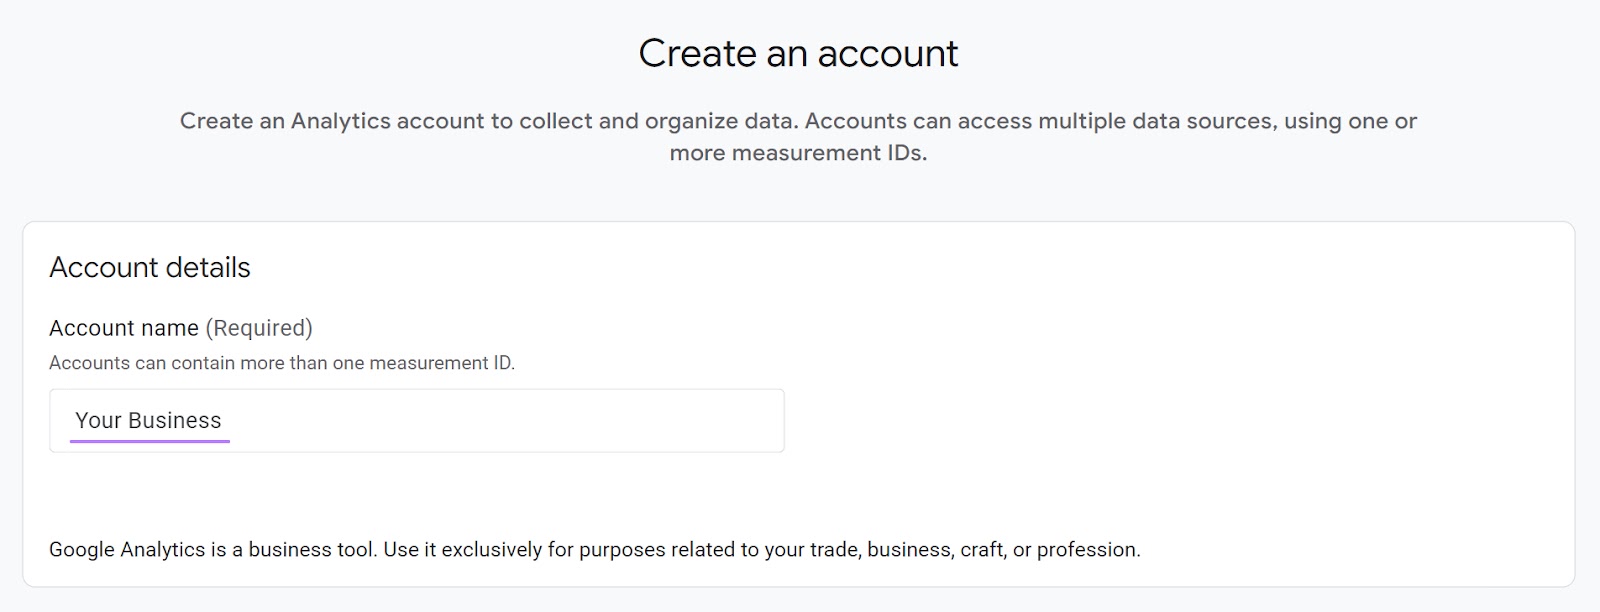 A “Create an account” page in GA4